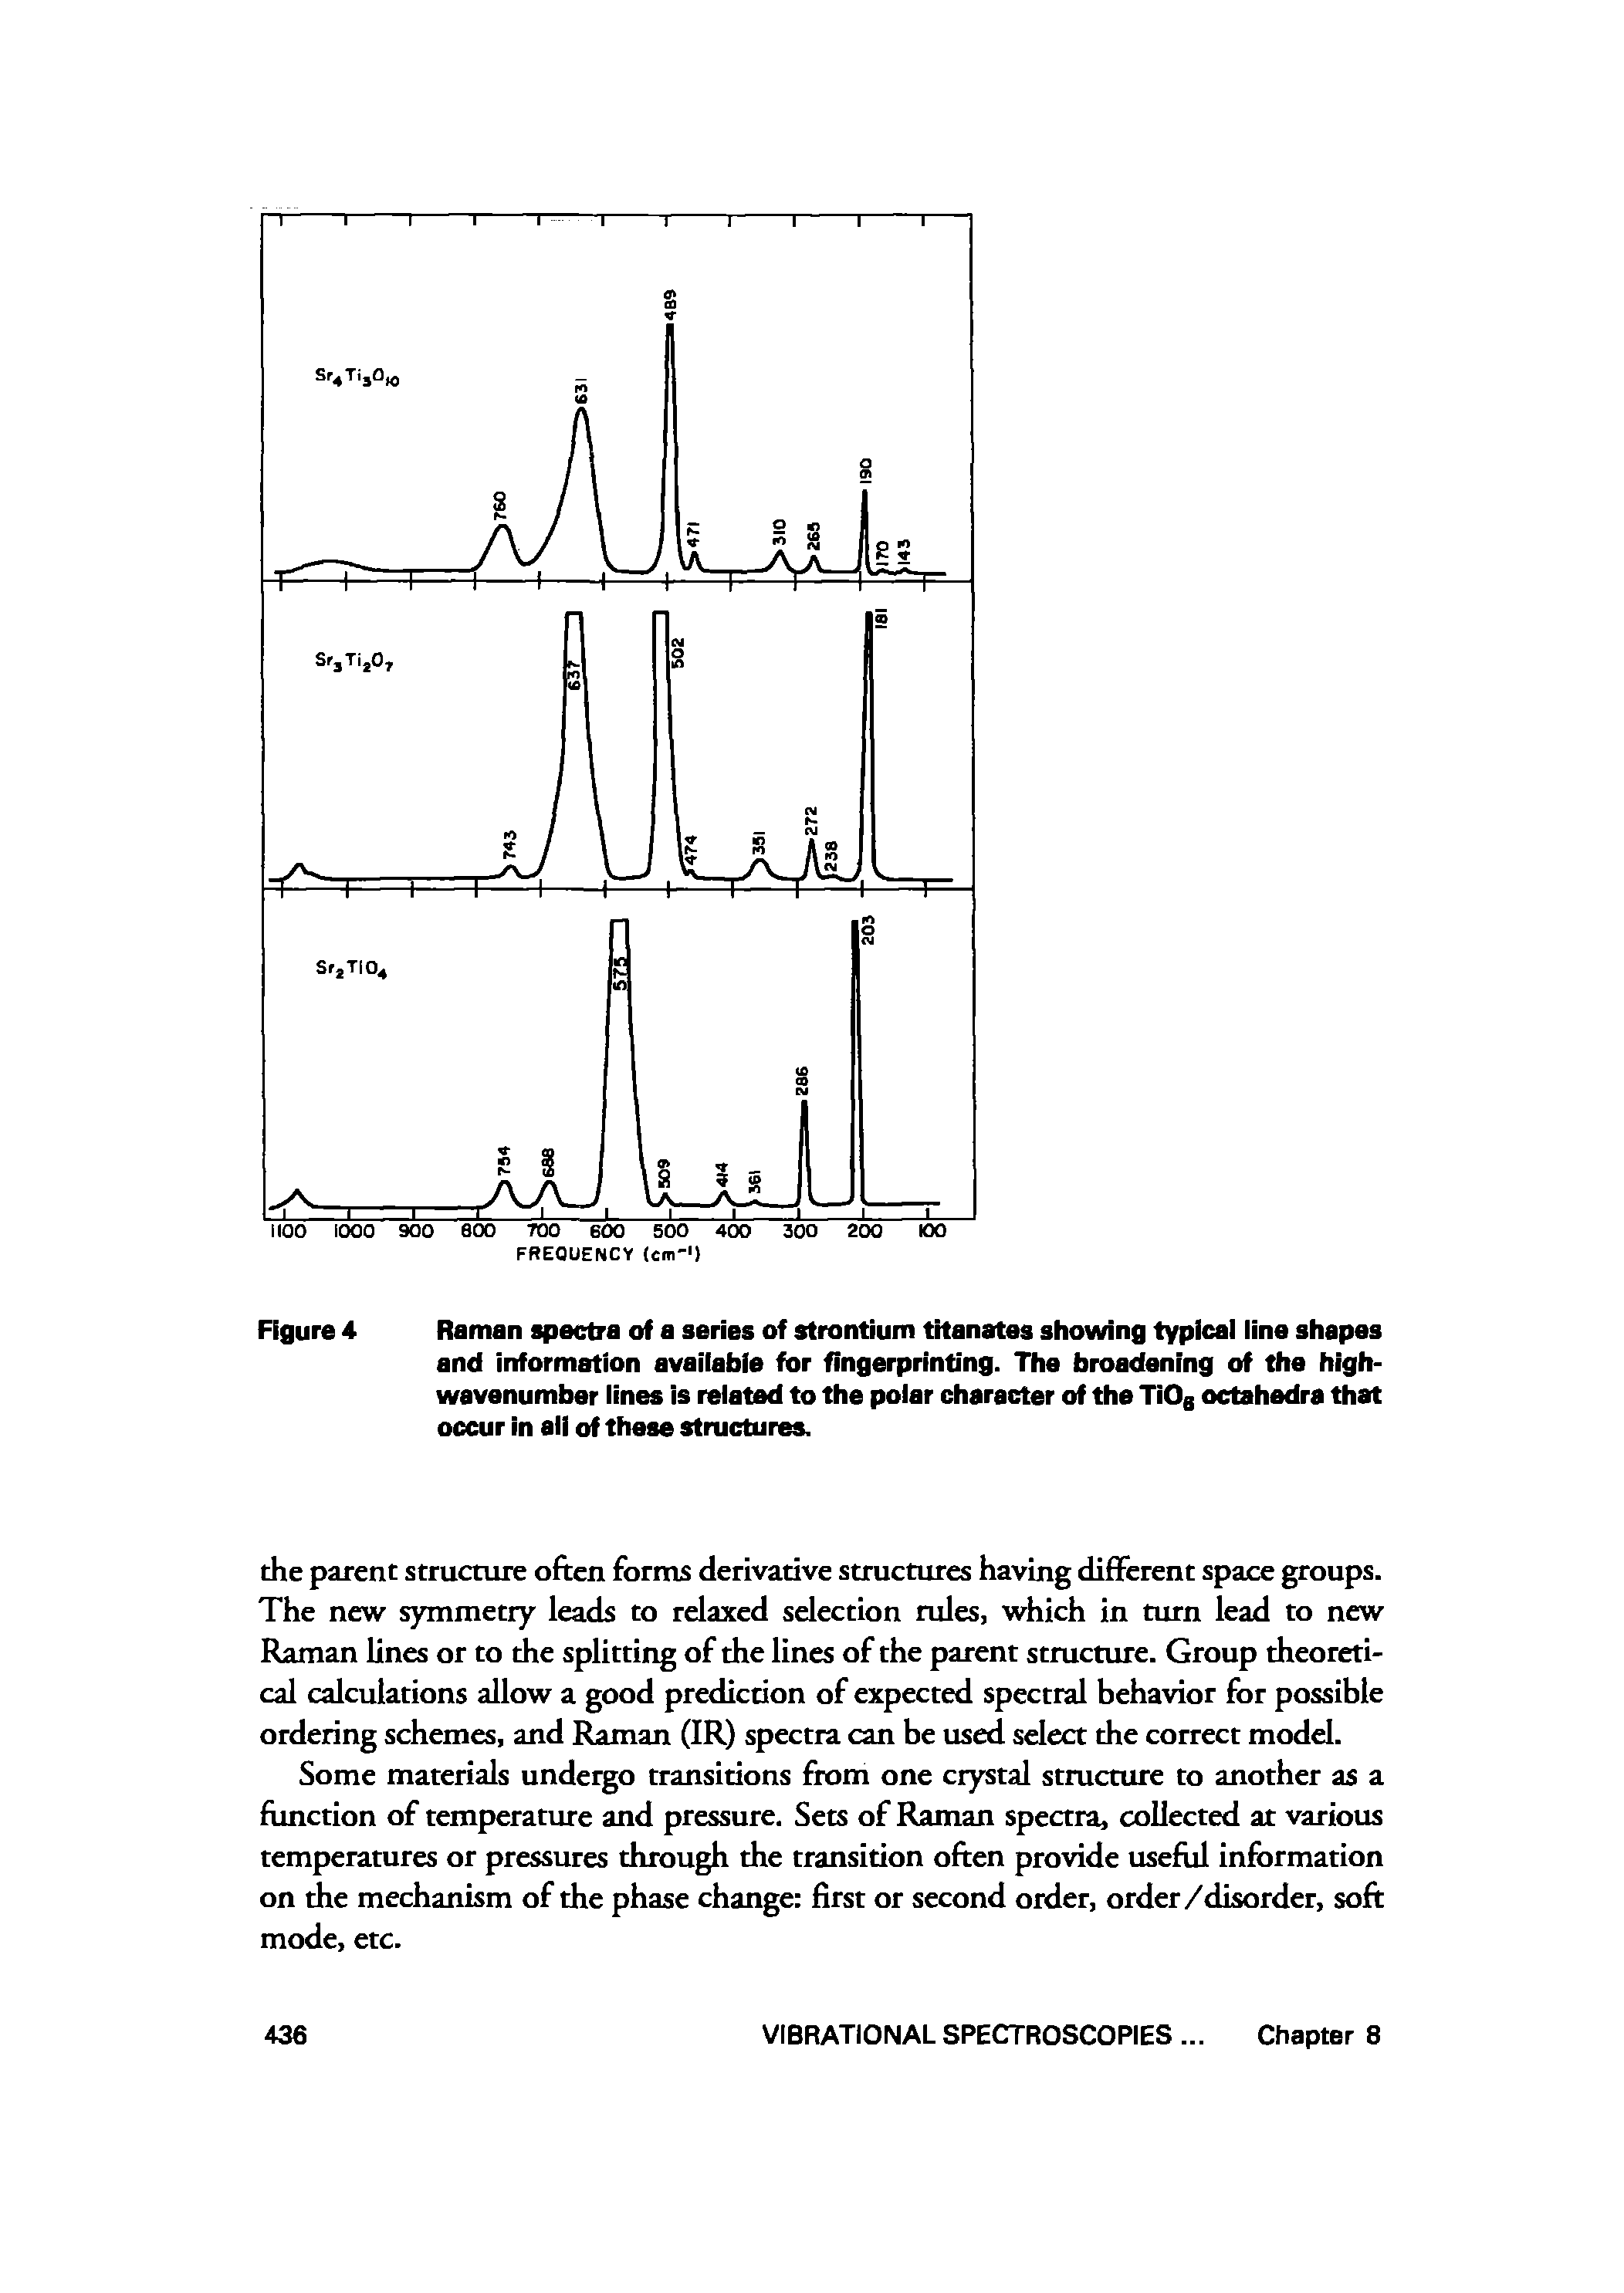 Figure 4 Raman spectra of a series of strontium titanates showing typicai iine shapes and information avaiiabie for fingerprinting. The broadening of the high-wavenumber lines is related to the polar character of the TiOs octahadra that occur in all of these structures.